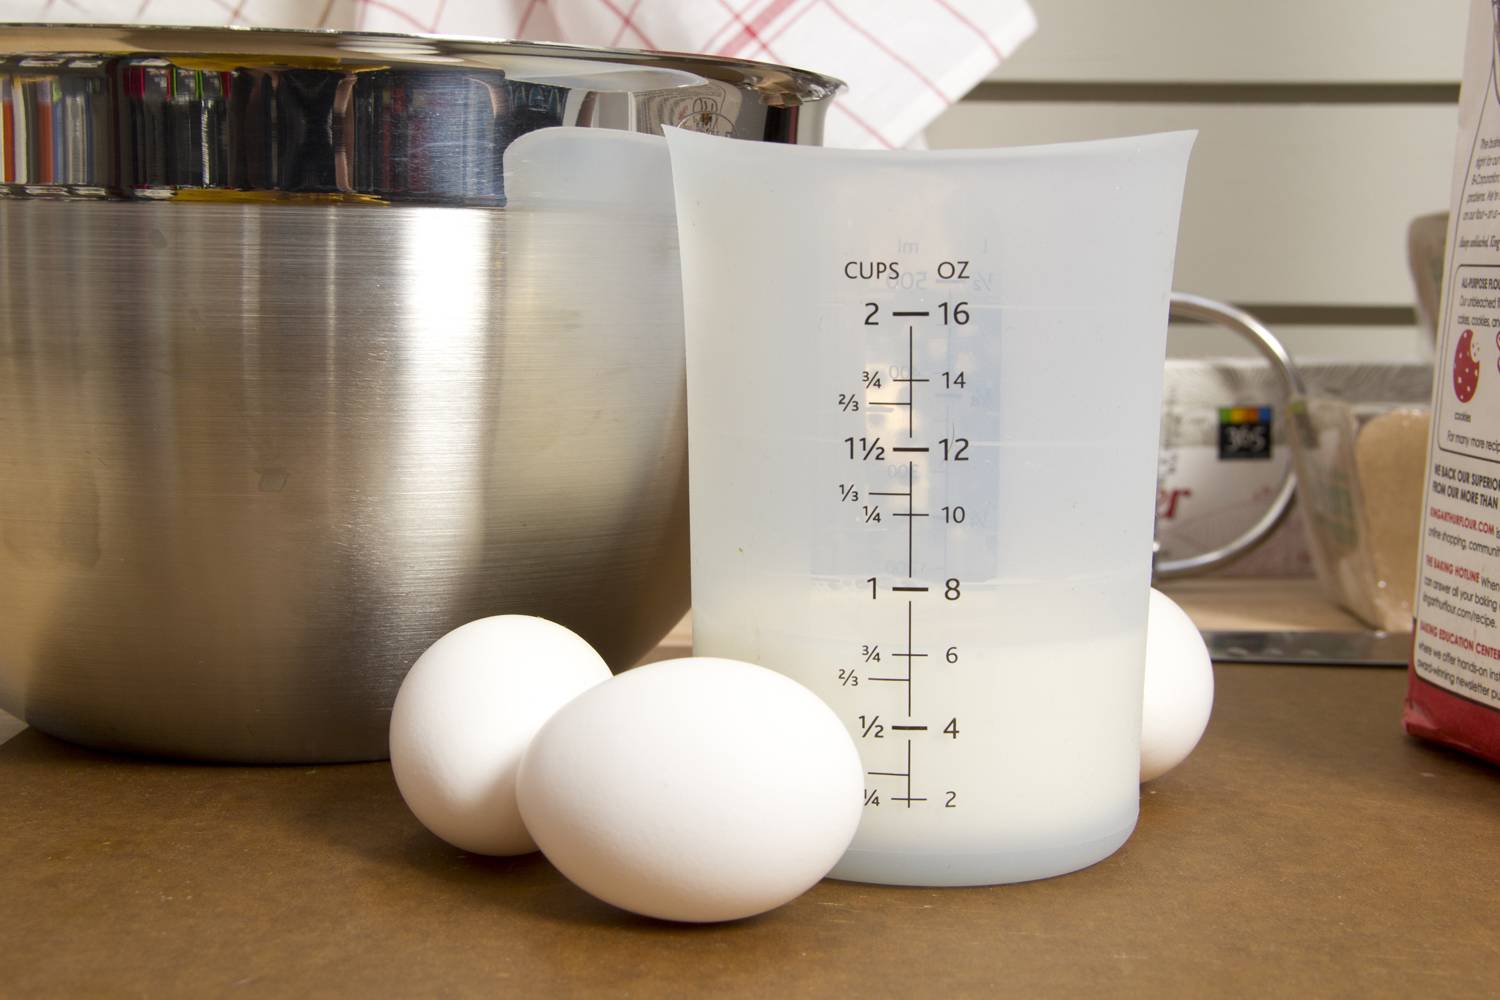 two eggs and measuring jug are on the counter